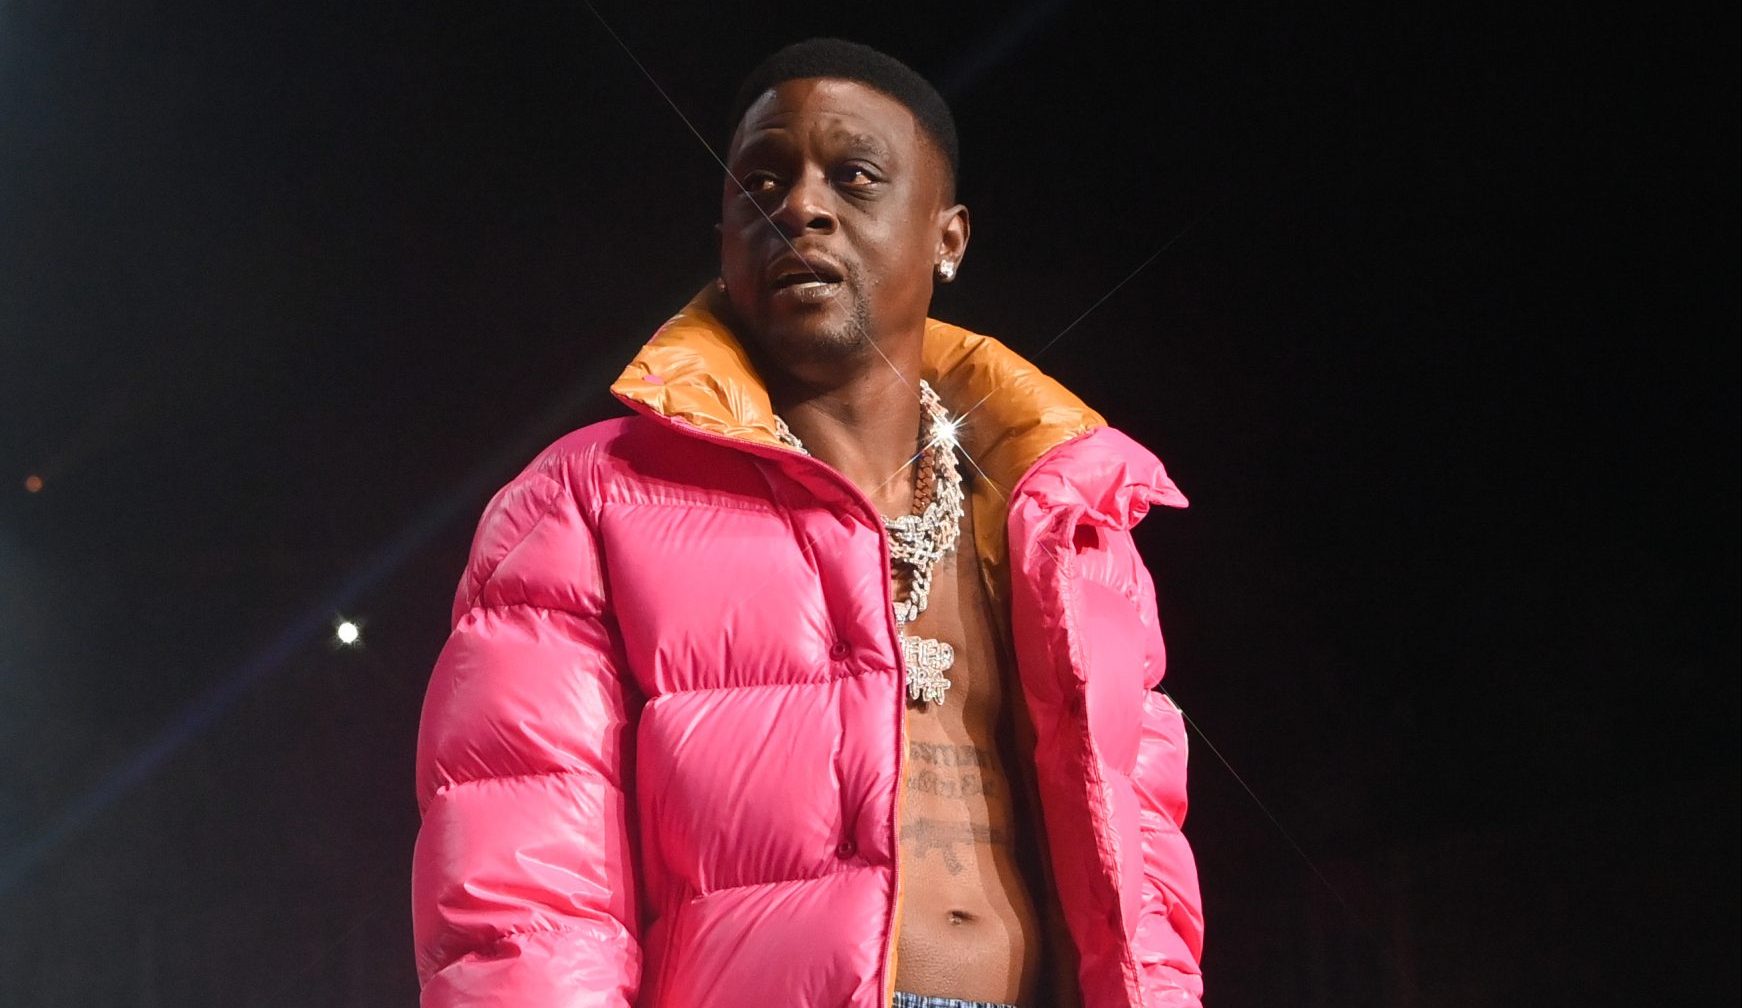 Boosie shared his last encounter with the police after being pulled over and rapped his hit single